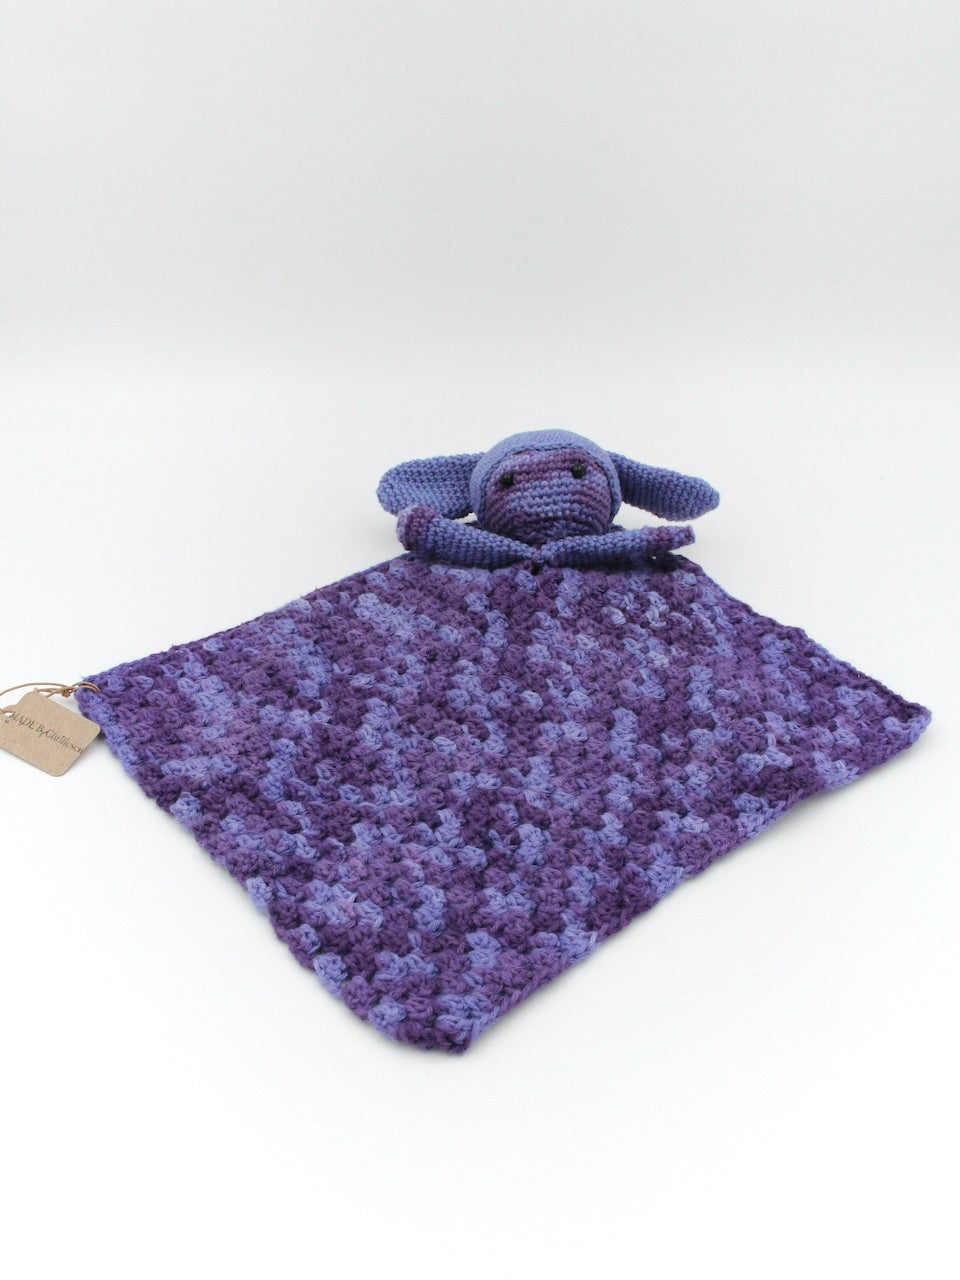 Nusse cloth - Blue and purple